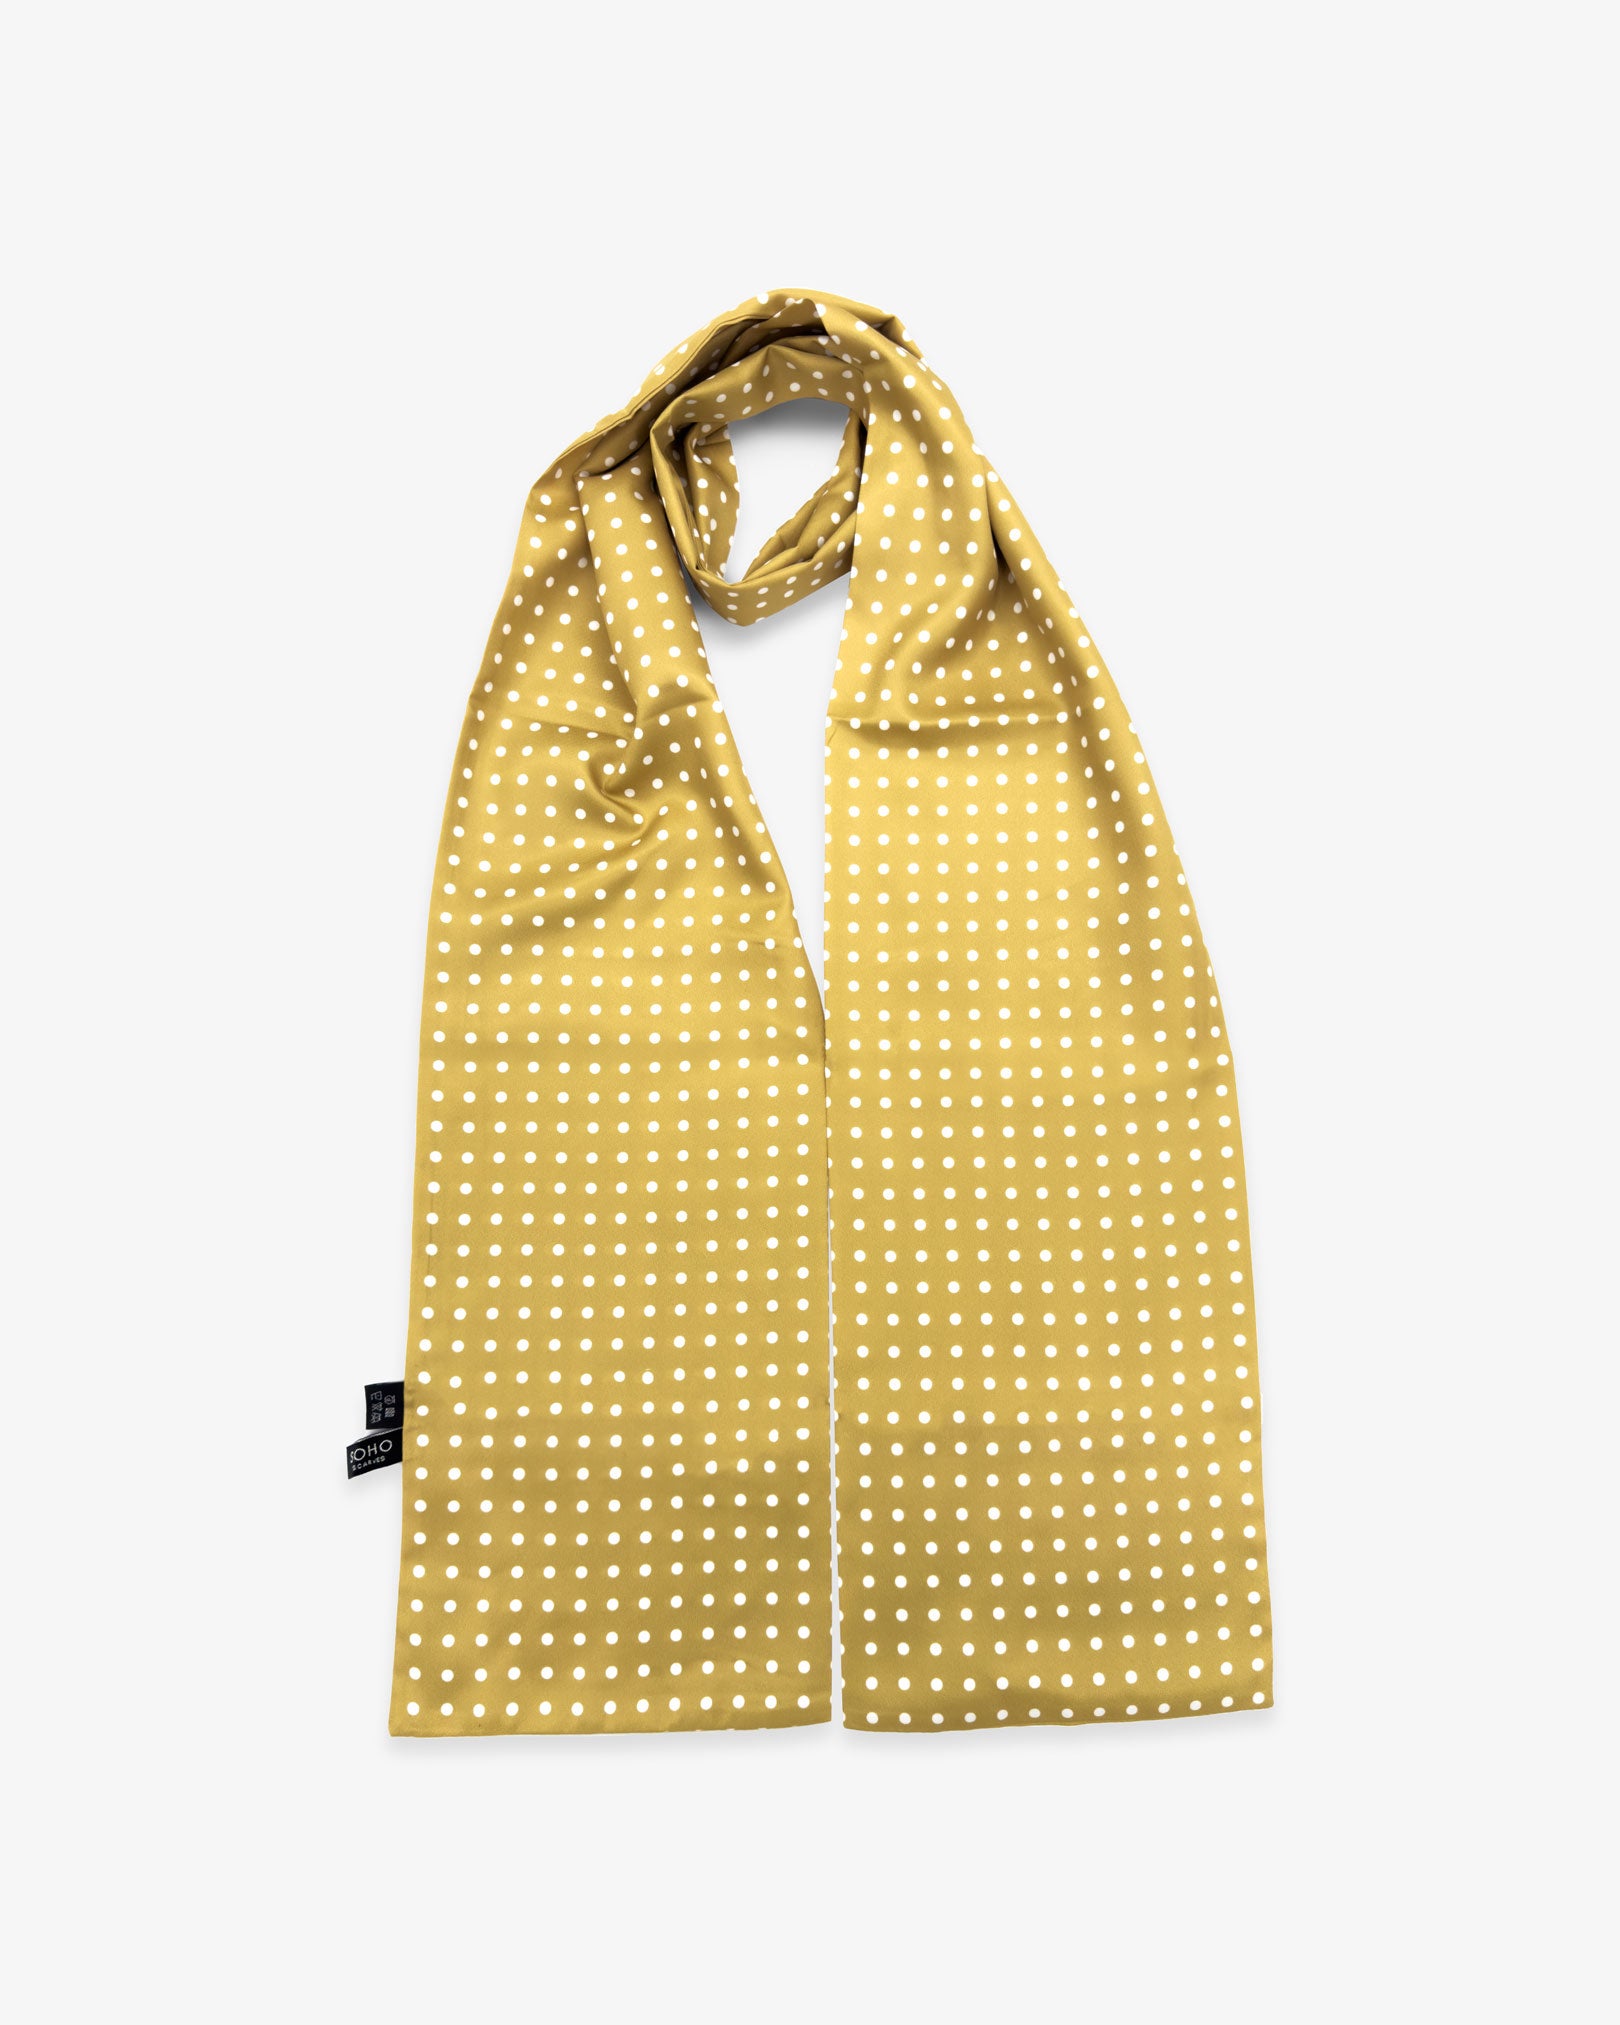 Looped view of the 'Denman' polyester scarf with both ends parallel, clearly showing the golden yellow fabric with white dots.